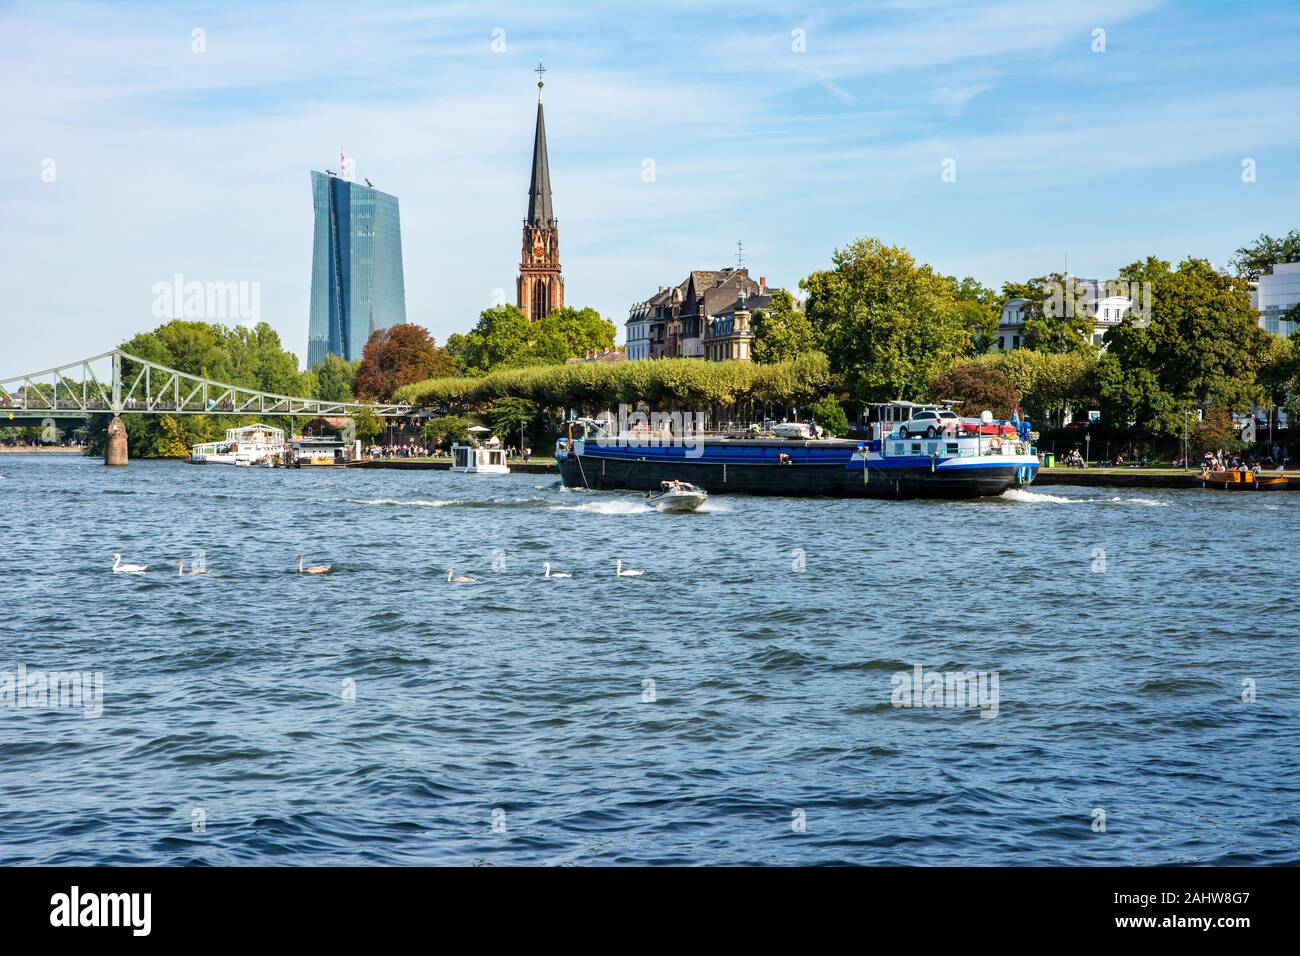 FRANKFURT, GERMANY - SEPTEMBER 15: Barge on the Main river in Frankfurt , Germany on September 15, 2019. Foto taken from Eiserner Steg with view to th Stock Photo